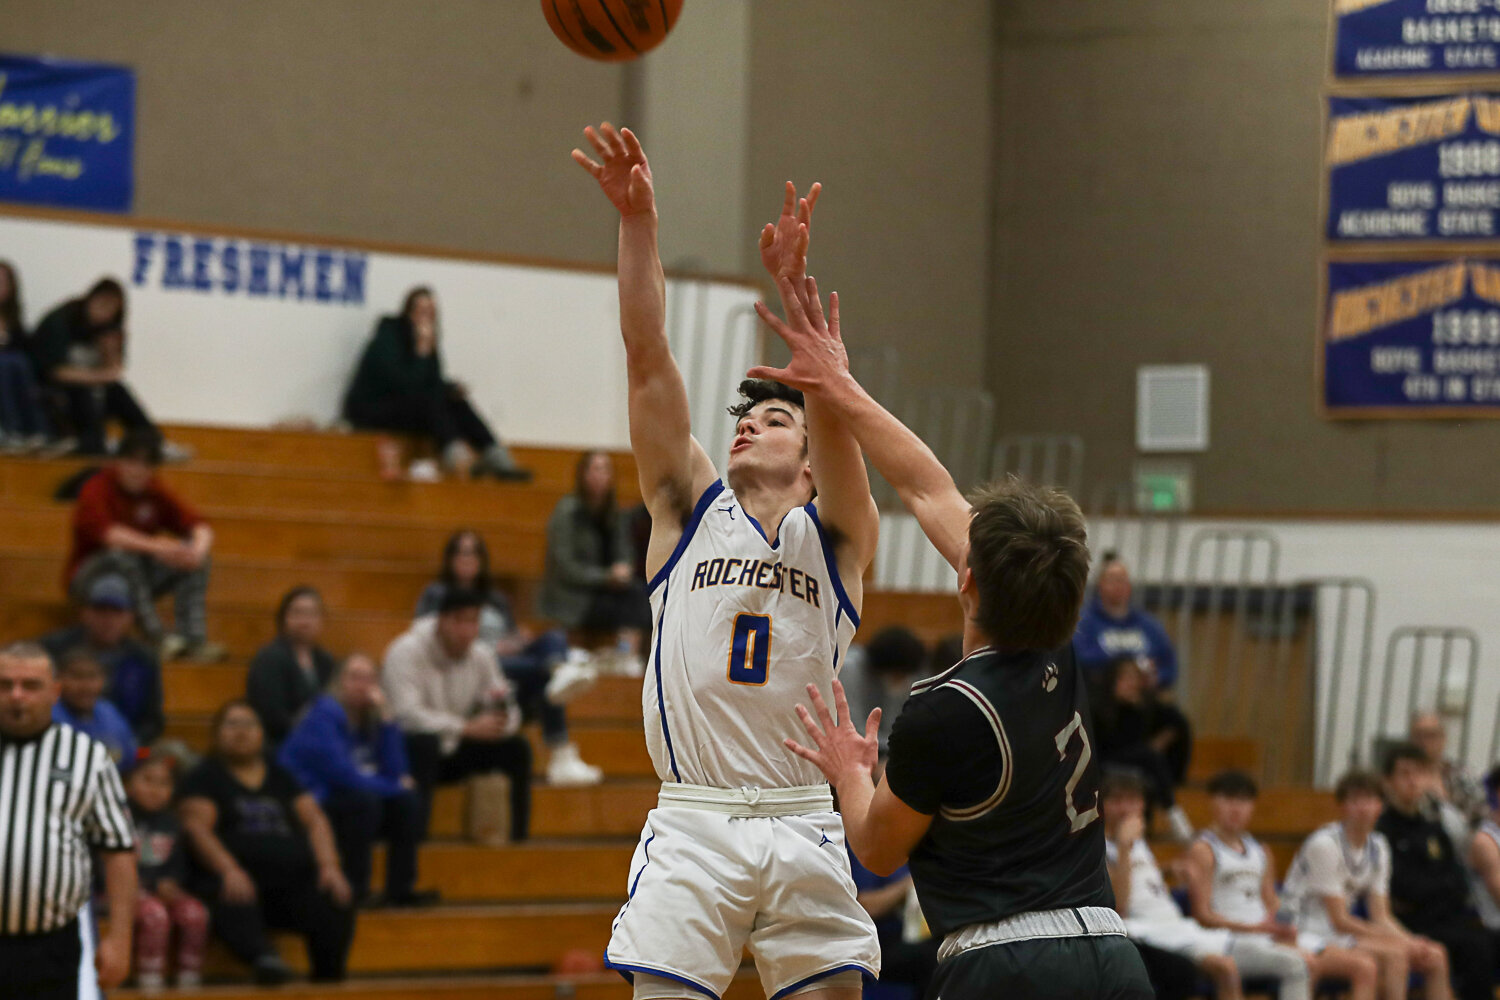 Carson Rotter fires a step-back jumper during Rochester's loss to W.F. West on Dec. 5.